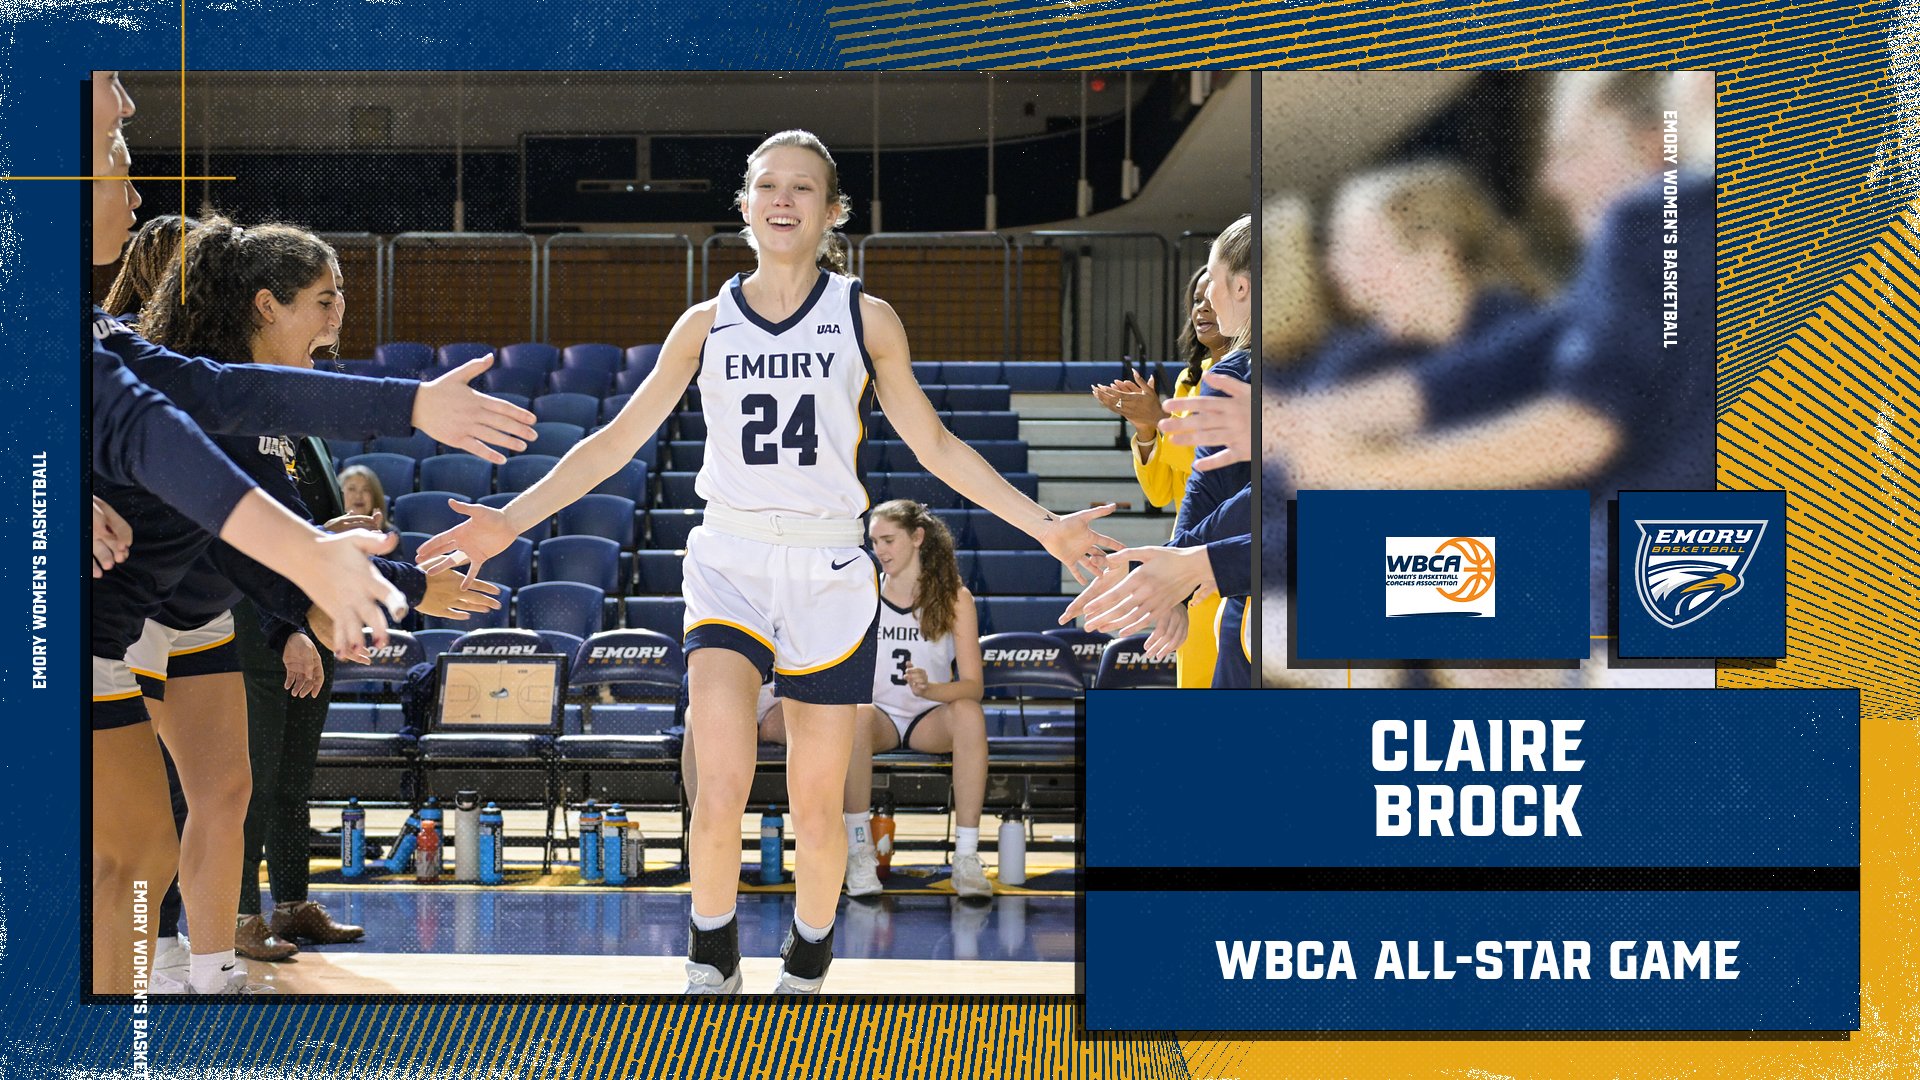 Women’s Basketball’s Claire Brock Selected for WBCA Collegiate All-Star Game